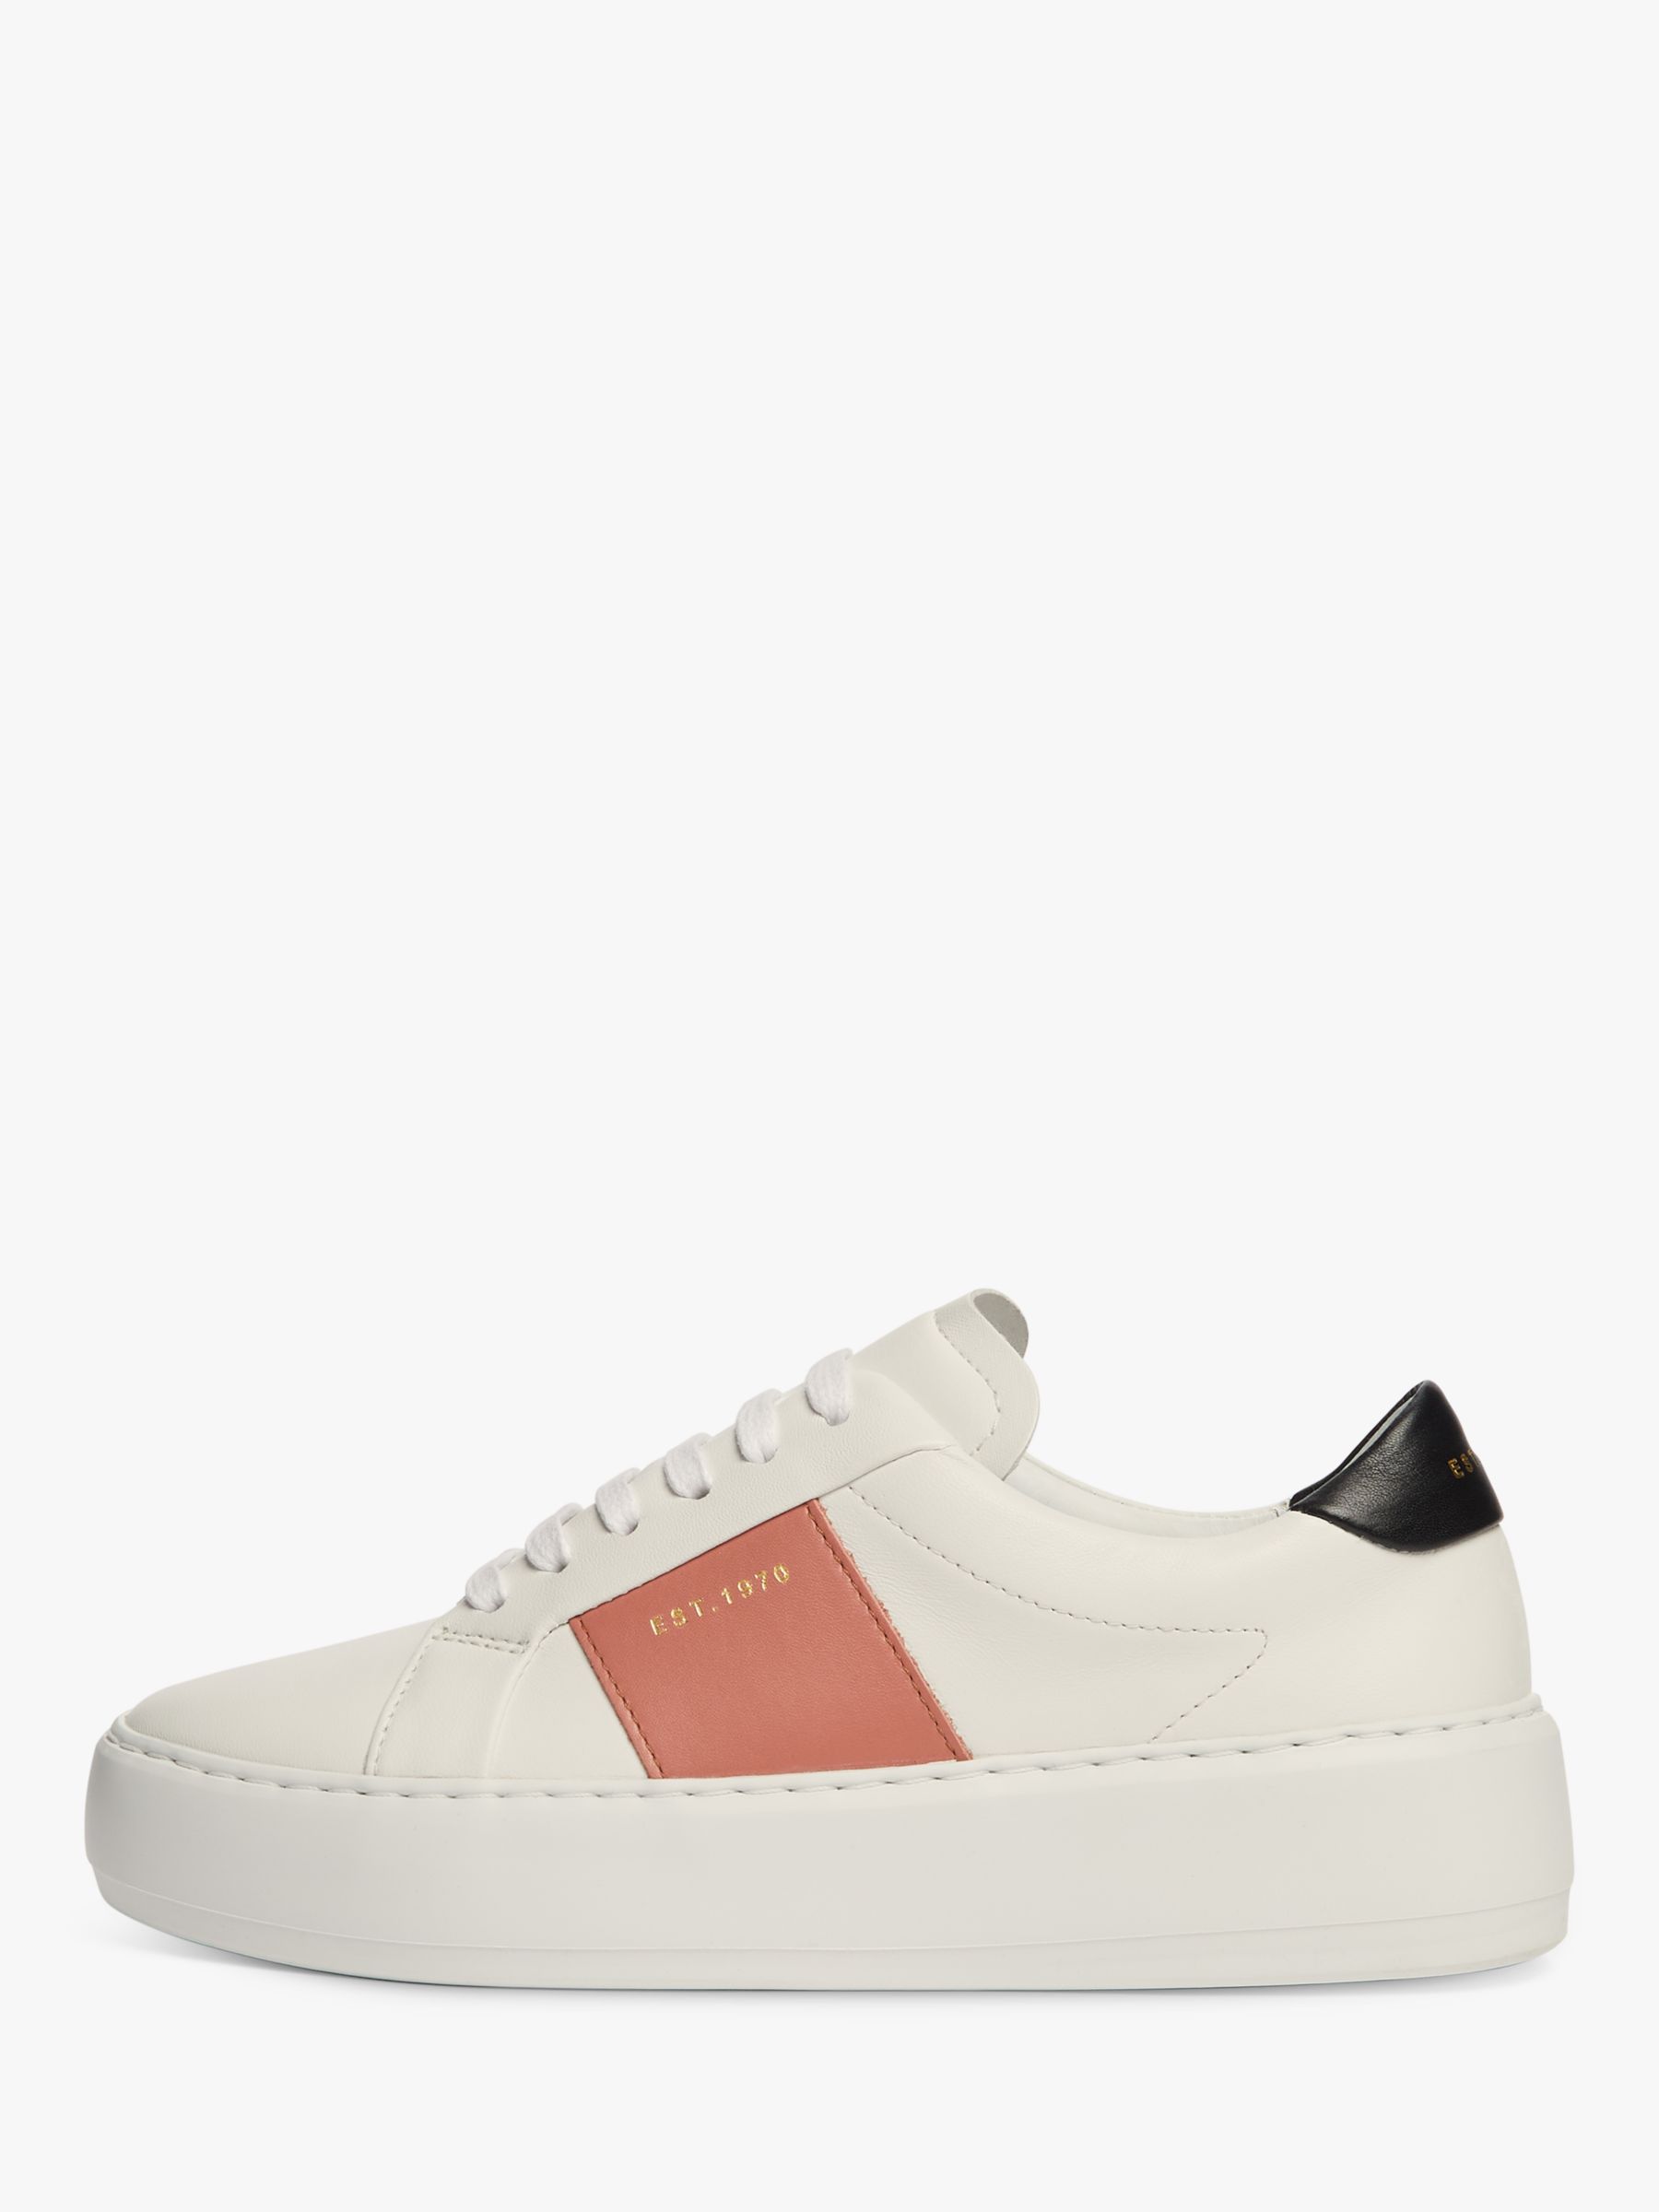 Jigsaw Riva Leather Flatform Trainers, White/Pink at John Lewis & Partners